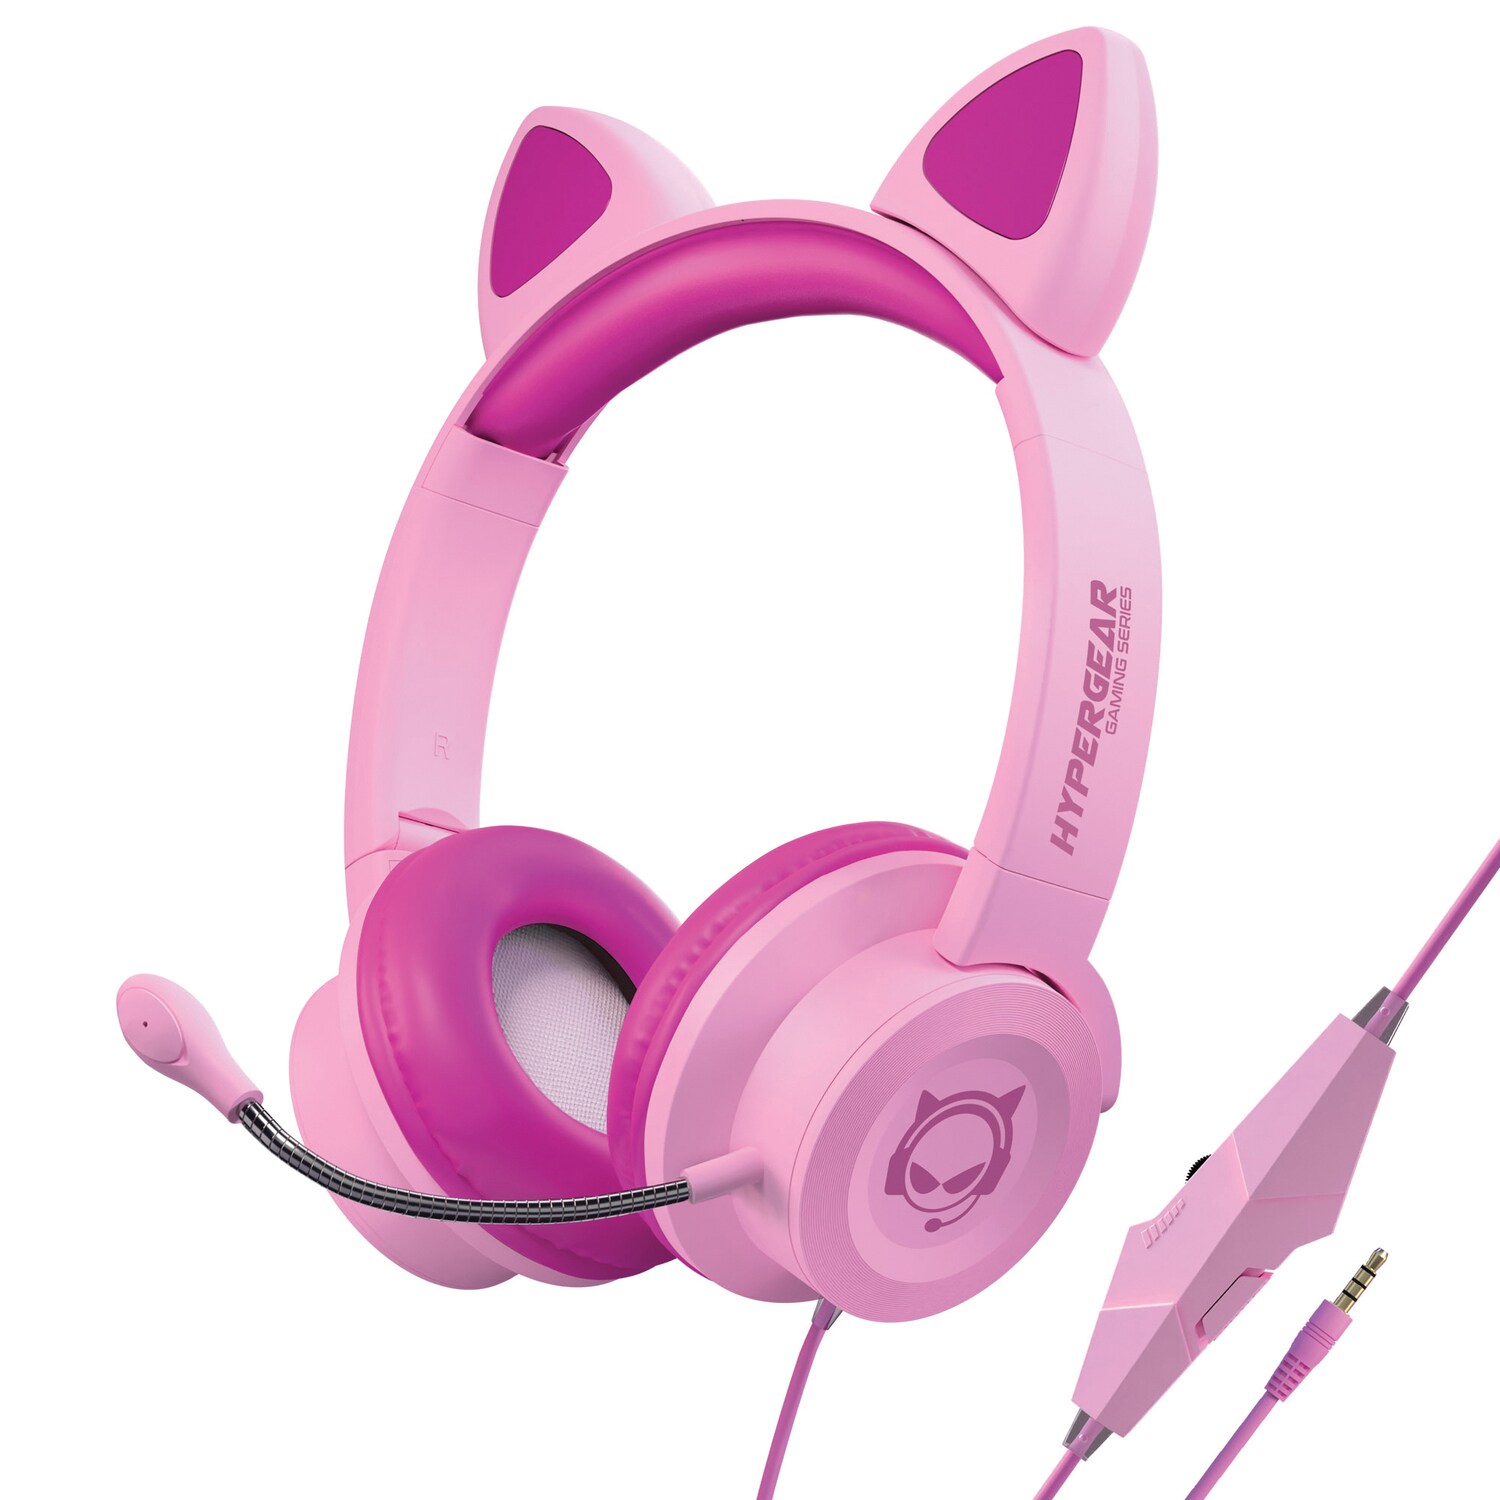 HyperGear Kombat Kitty Pink Gaming Headset in Video Gaming Accessories department Lowes.com